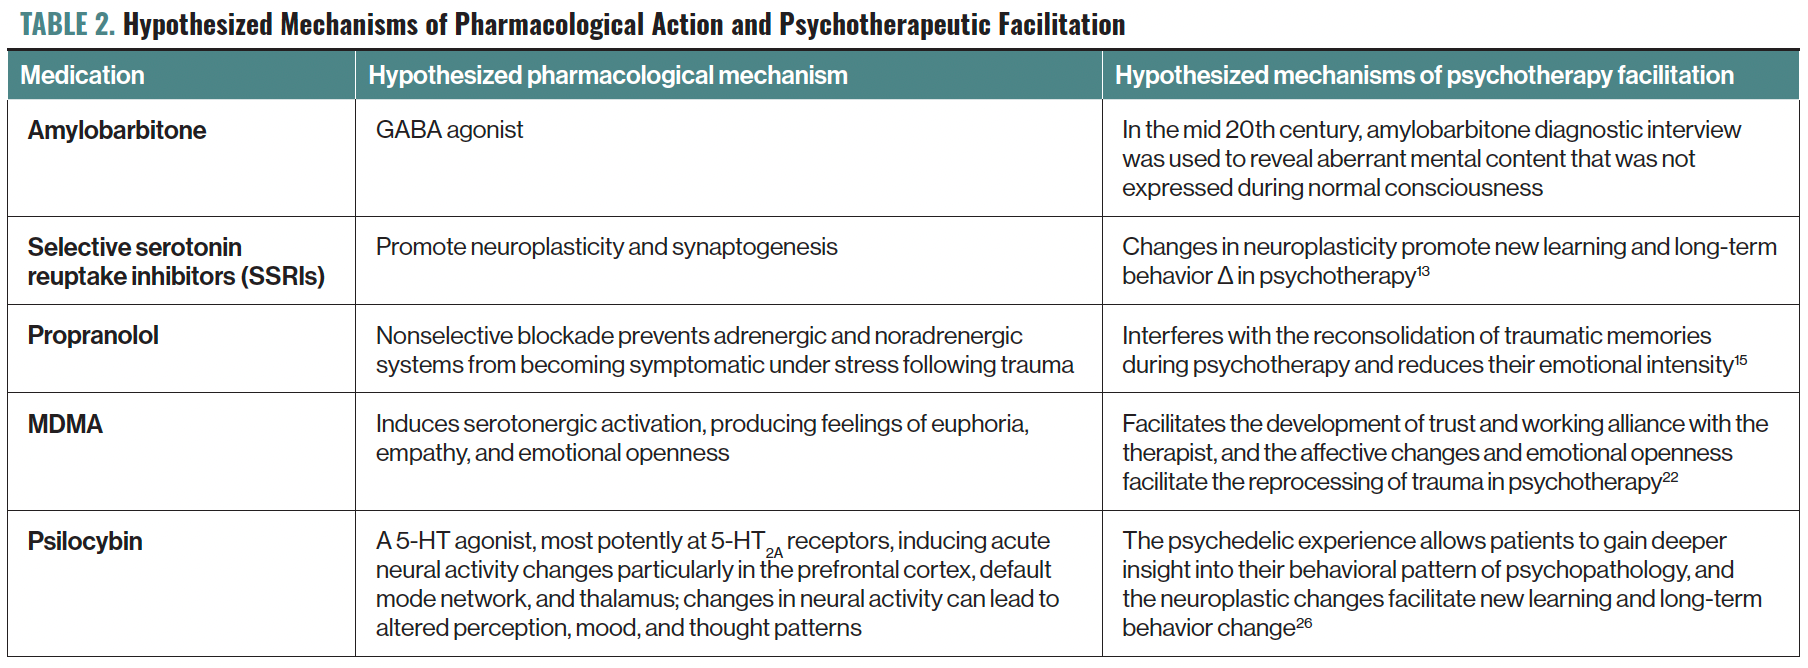 TABLE 2. Hypothesized Mechanisms of Pharmacological Action and Psychotherapeutic Facilitation